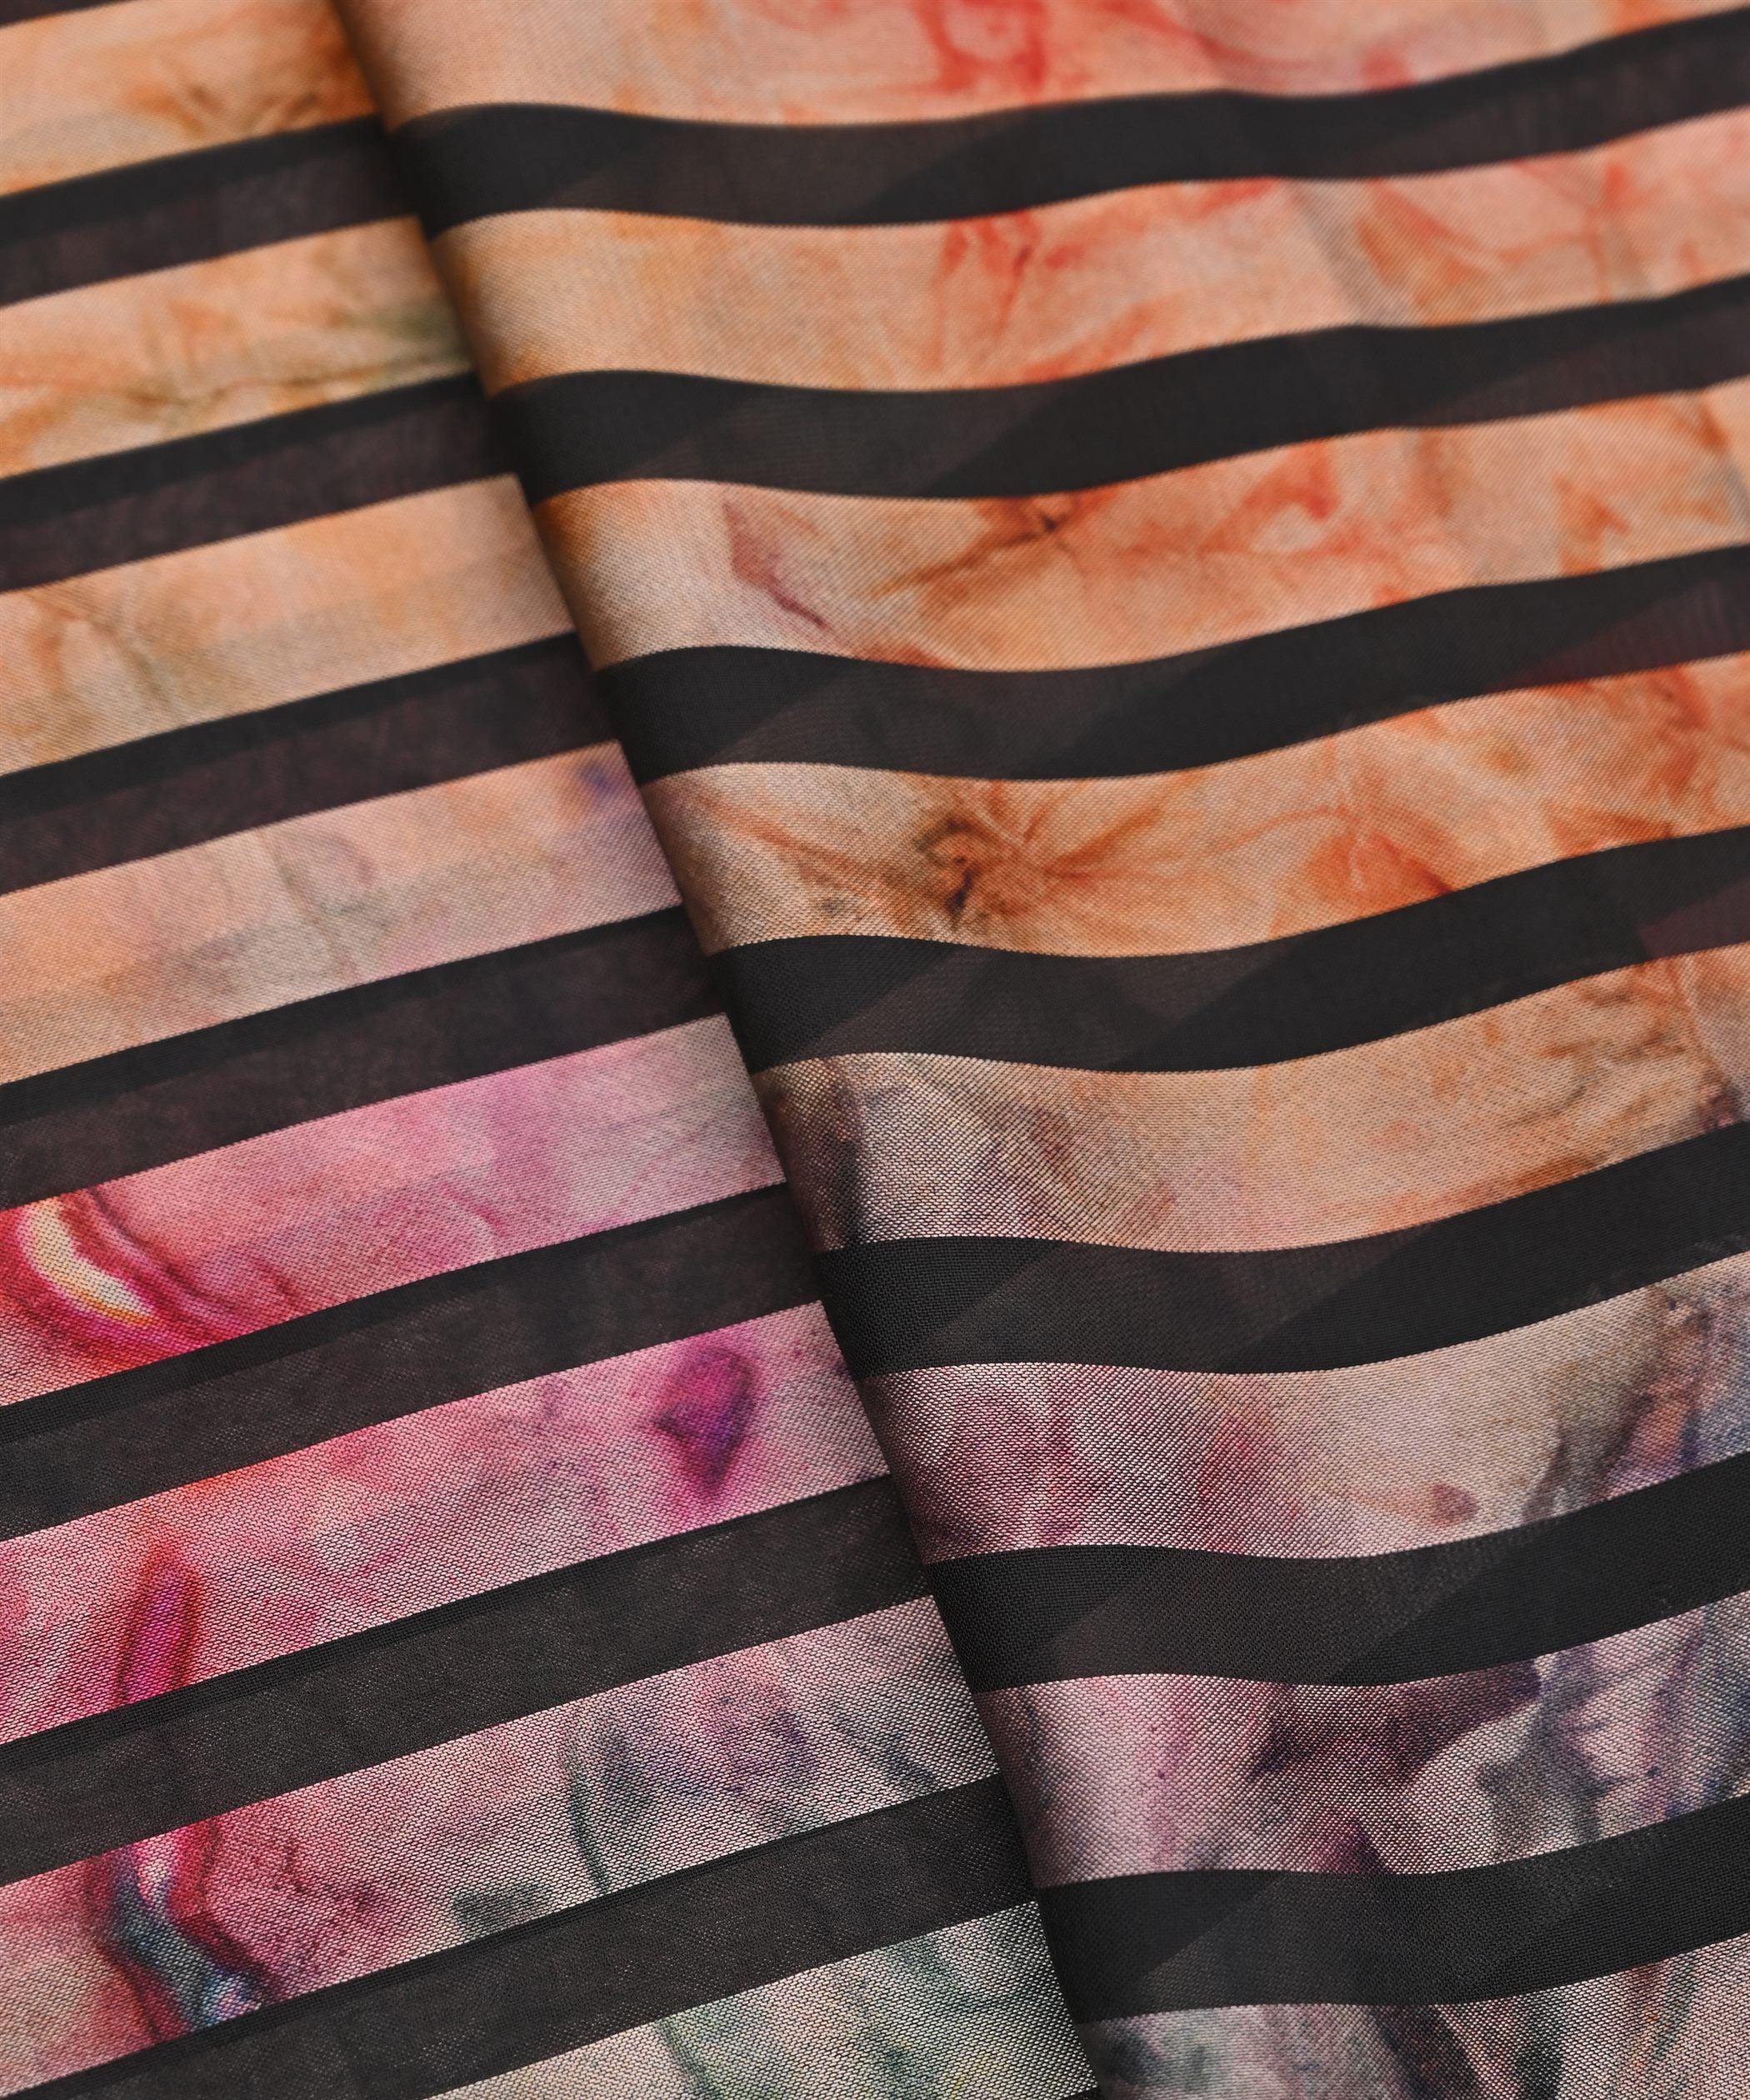 Light Peach Tie and Dye Georgette Fabric with Zebra Stripes